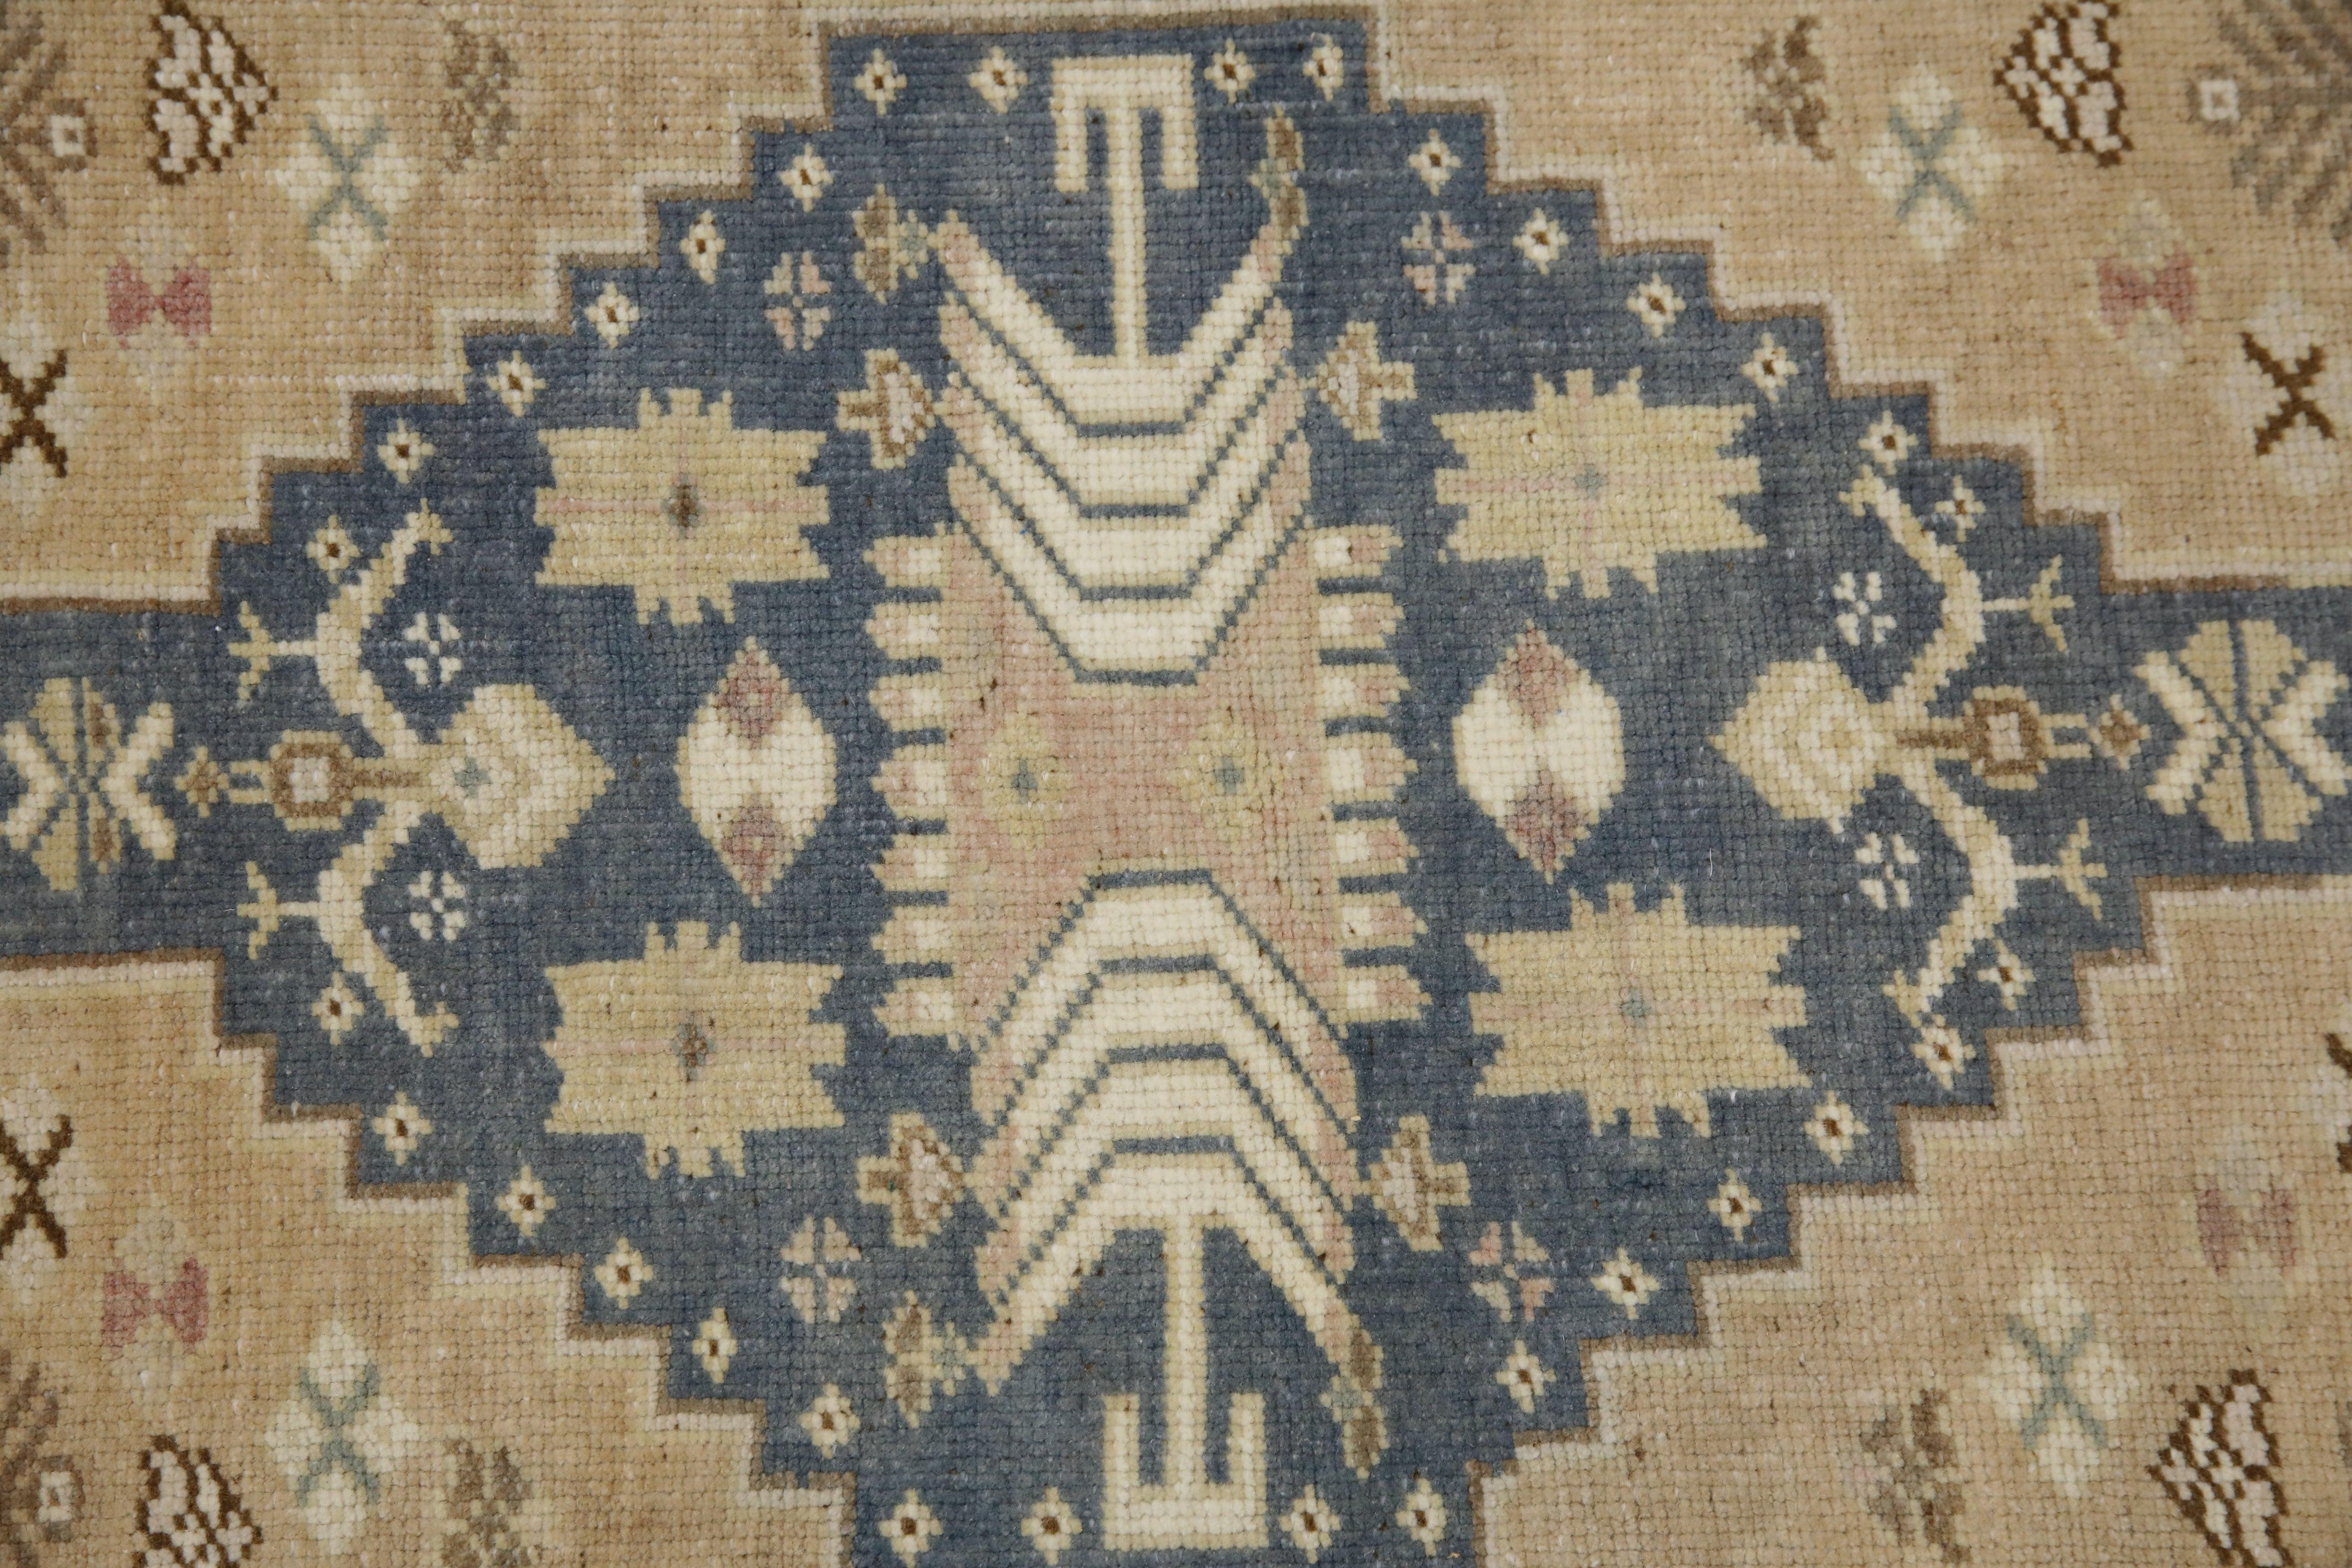 Oriental Hand Knotted Turkish Mini Rug 2' x 3' #8837
Explore a curated collection of hallway runners, wool rugs, and handmade masterpieces, where elegance meets functionality. Elevate your space with a variety of styles to suit every taste. Our